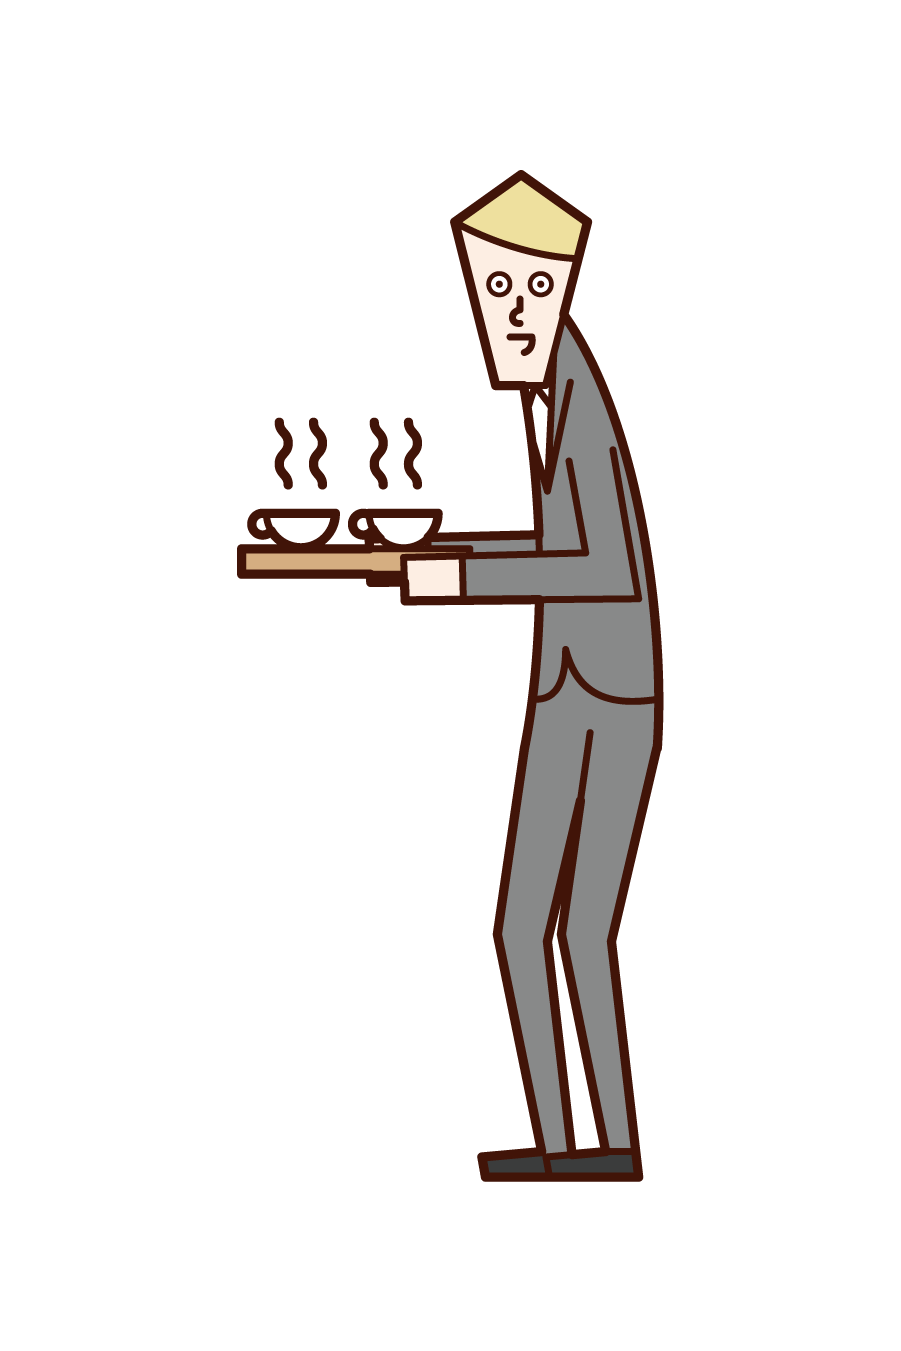 Illustration of a person (man) who serves tea or coffee